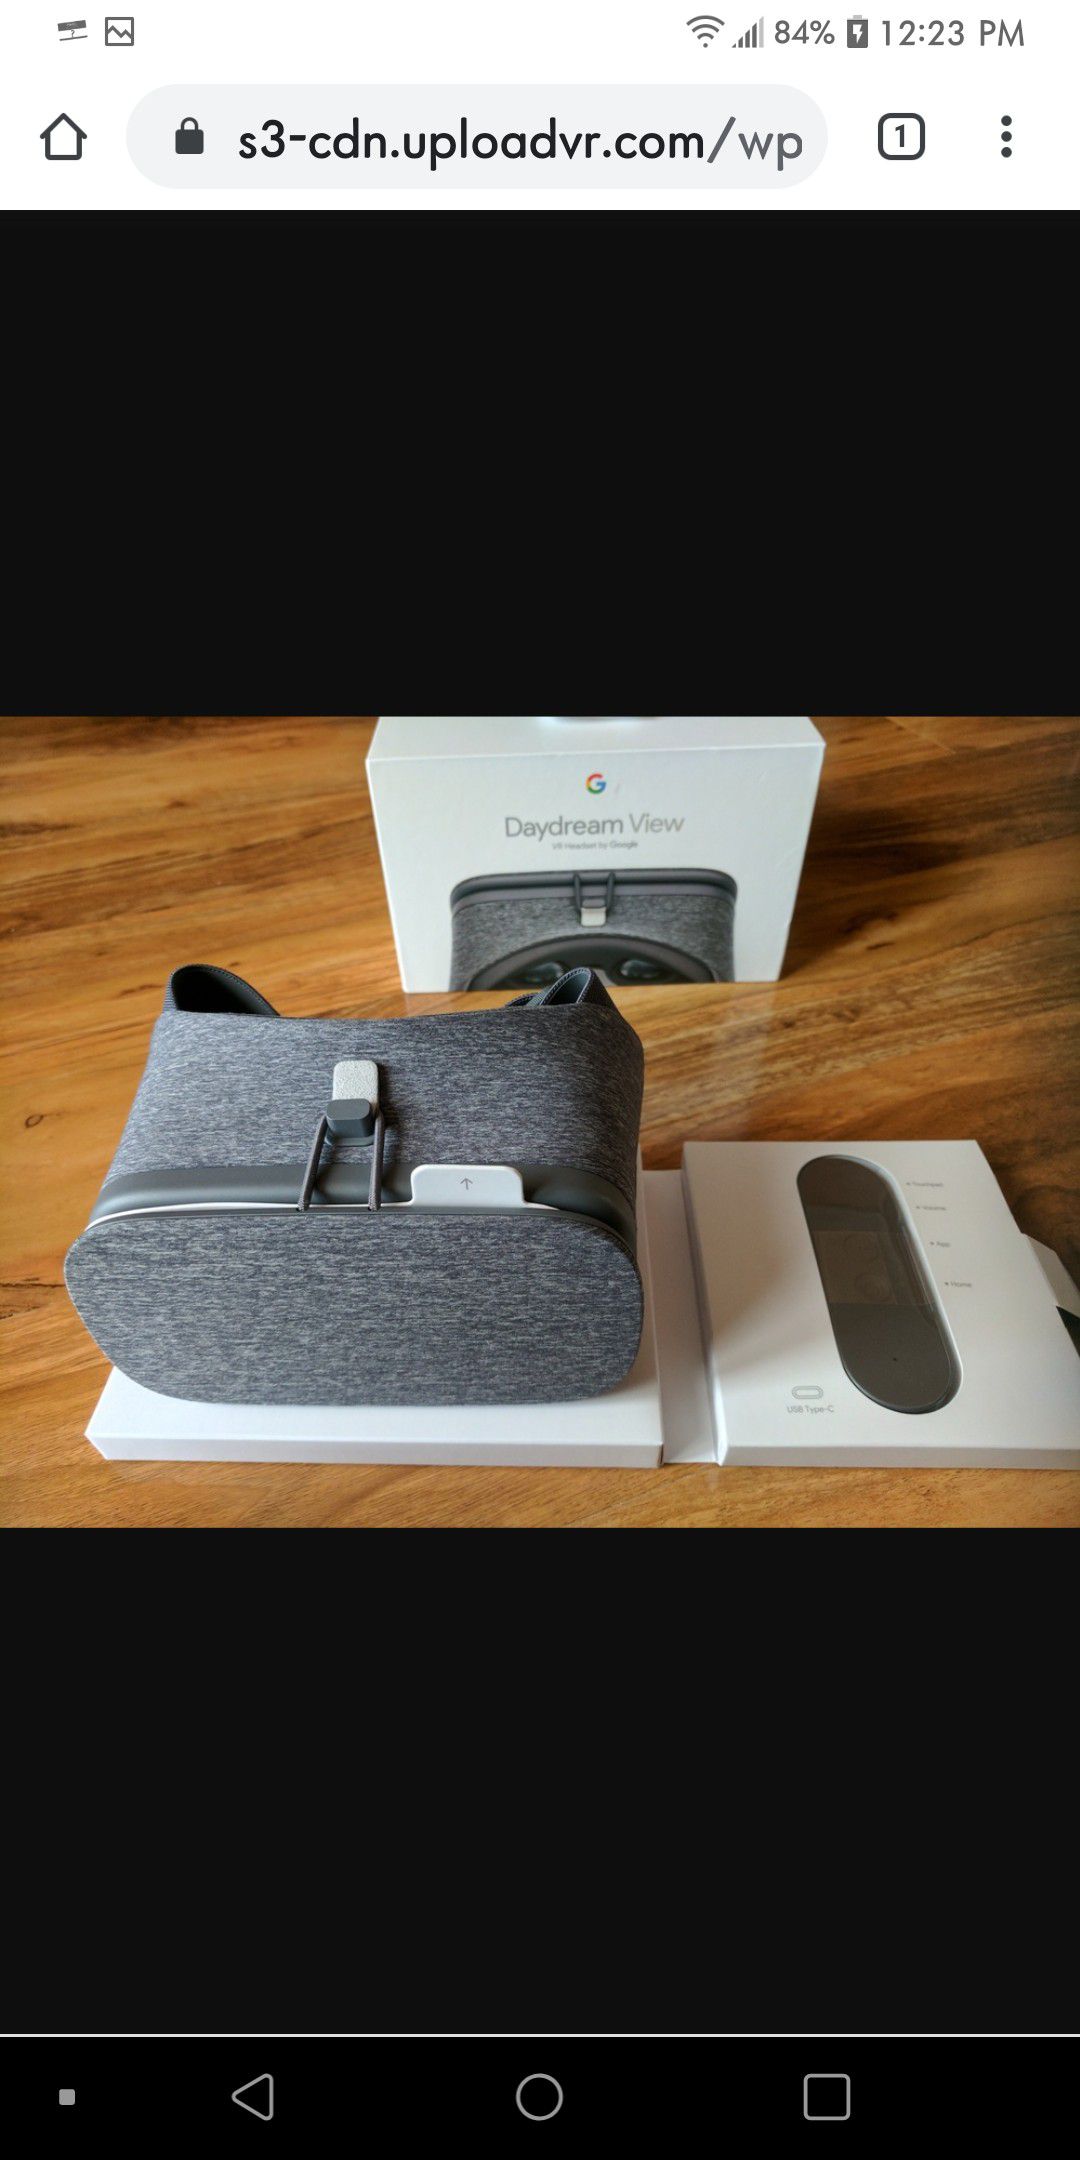 DAYDREAM VIEW VR Headset by Google